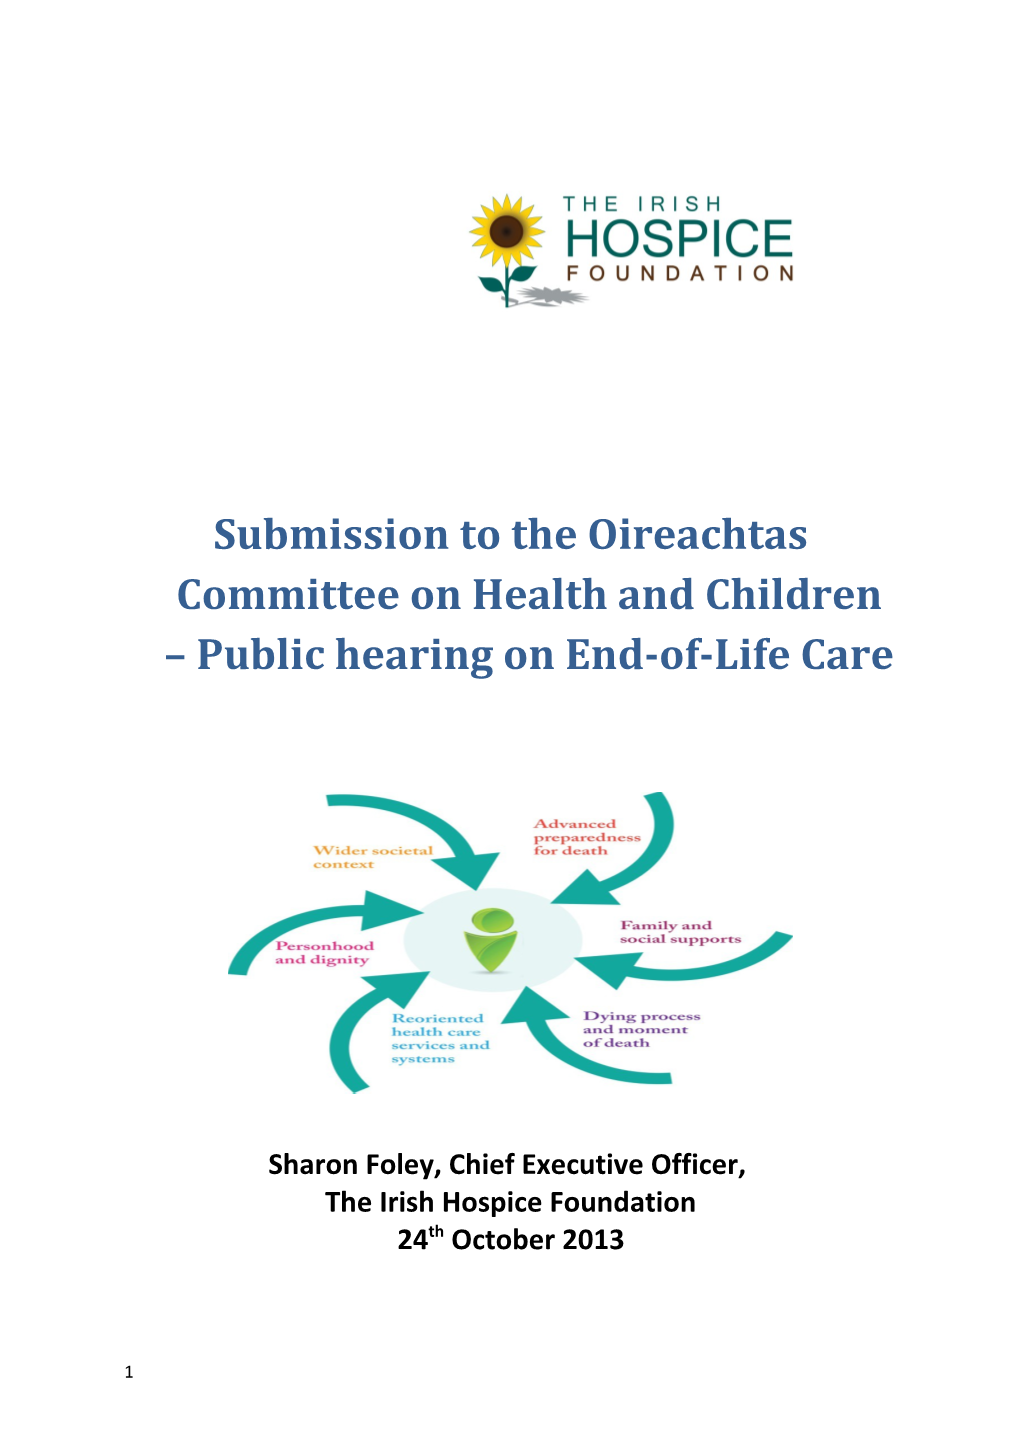 Submission to the Oireachtas Committee on Health and Children Public Hearing on End-Of-Life Care